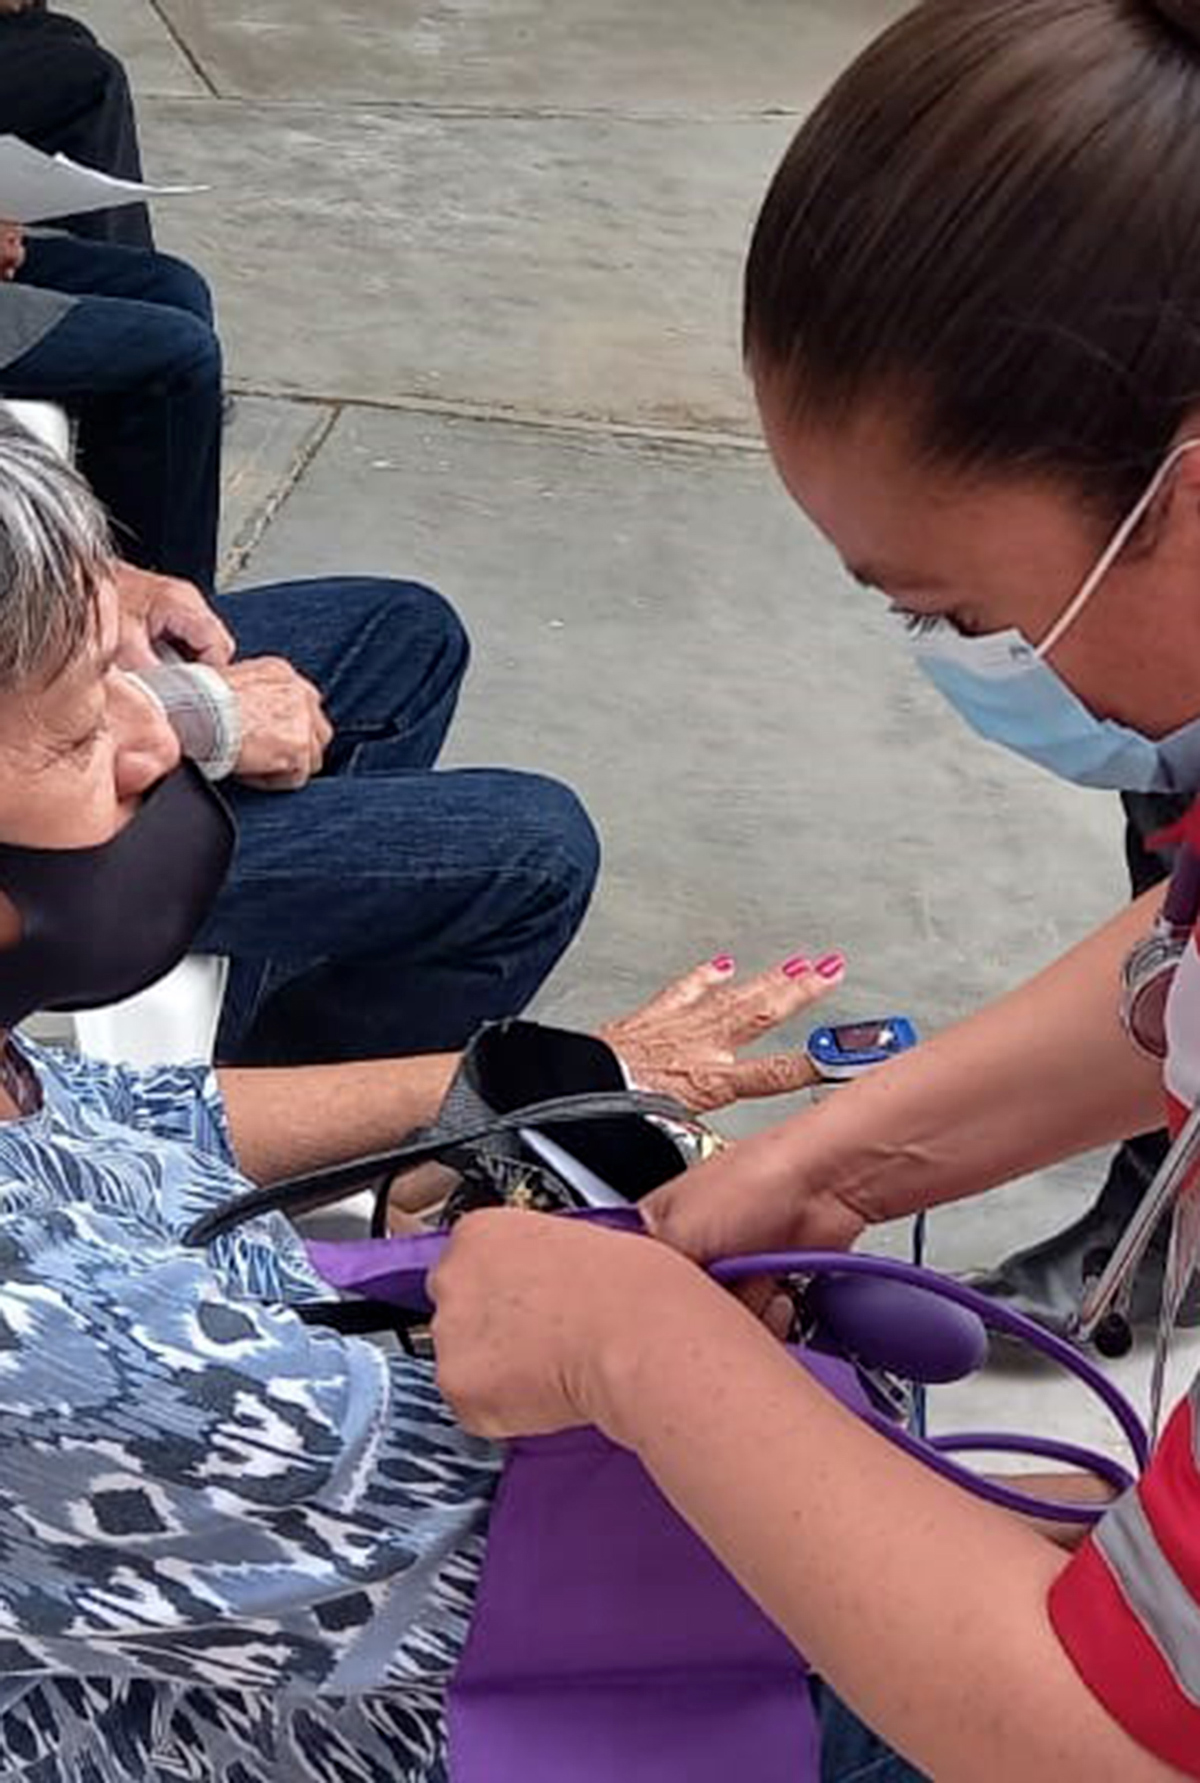 A Red Cross worker provides medical care to an elderly woman, both wearing surgical masks.